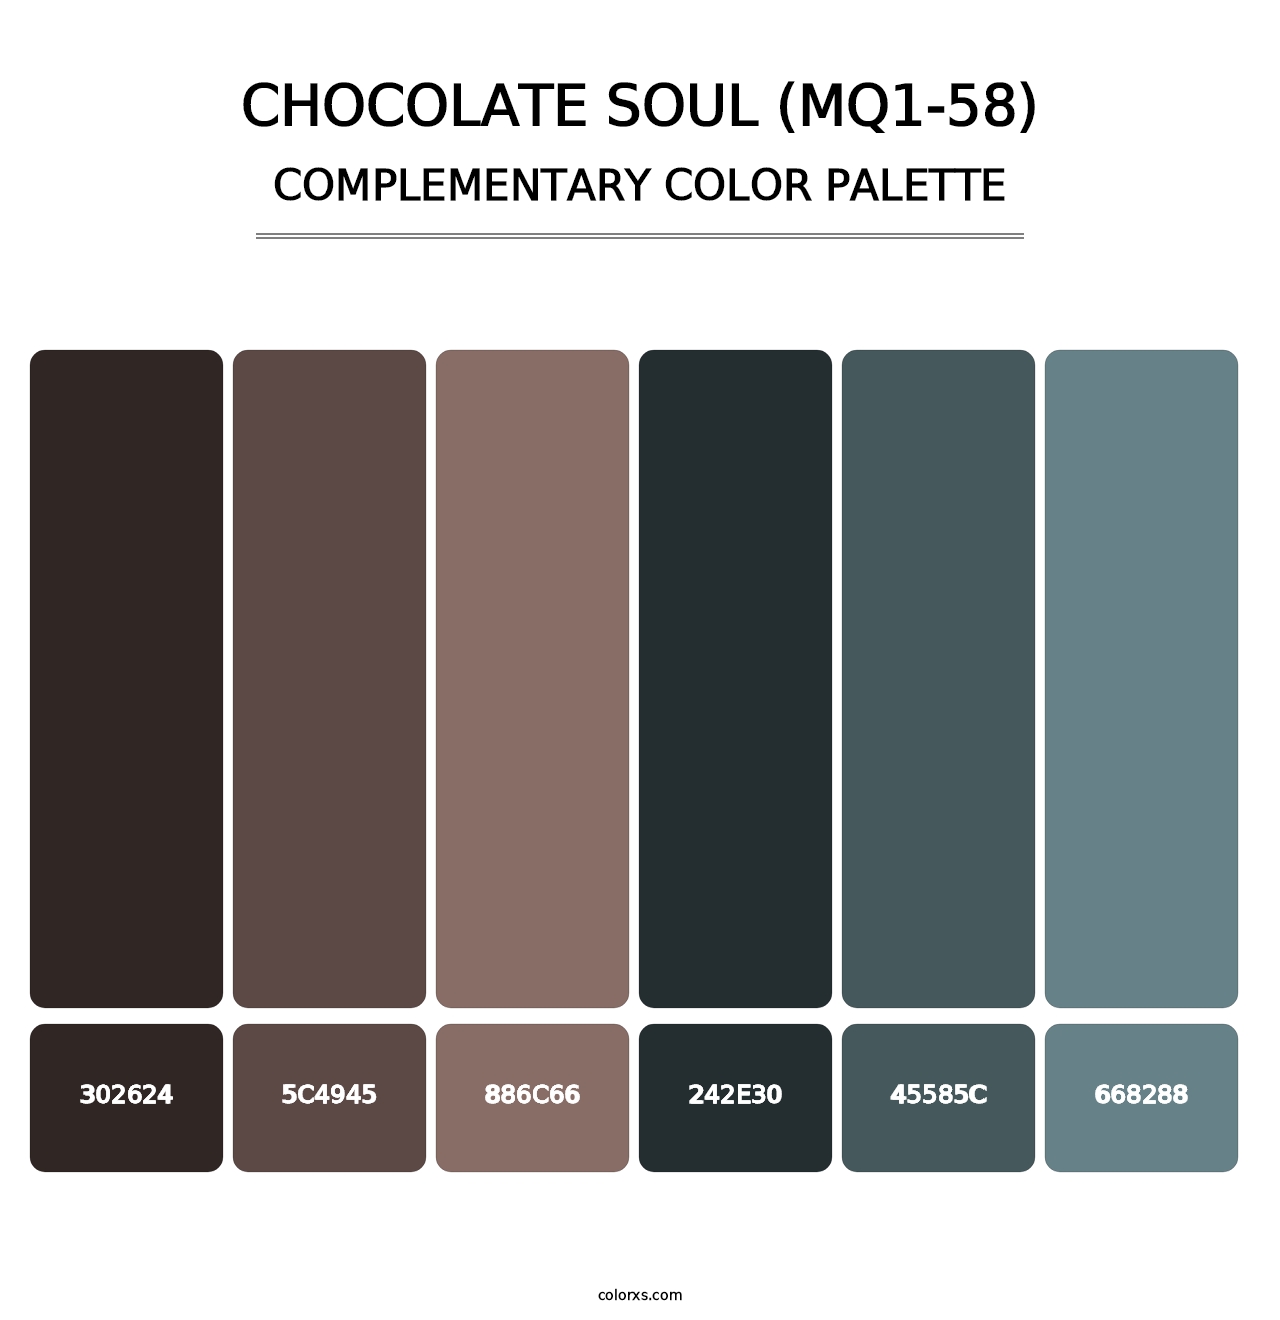 Chocolate Soul (MQ1-58) - Complementary Color Palette